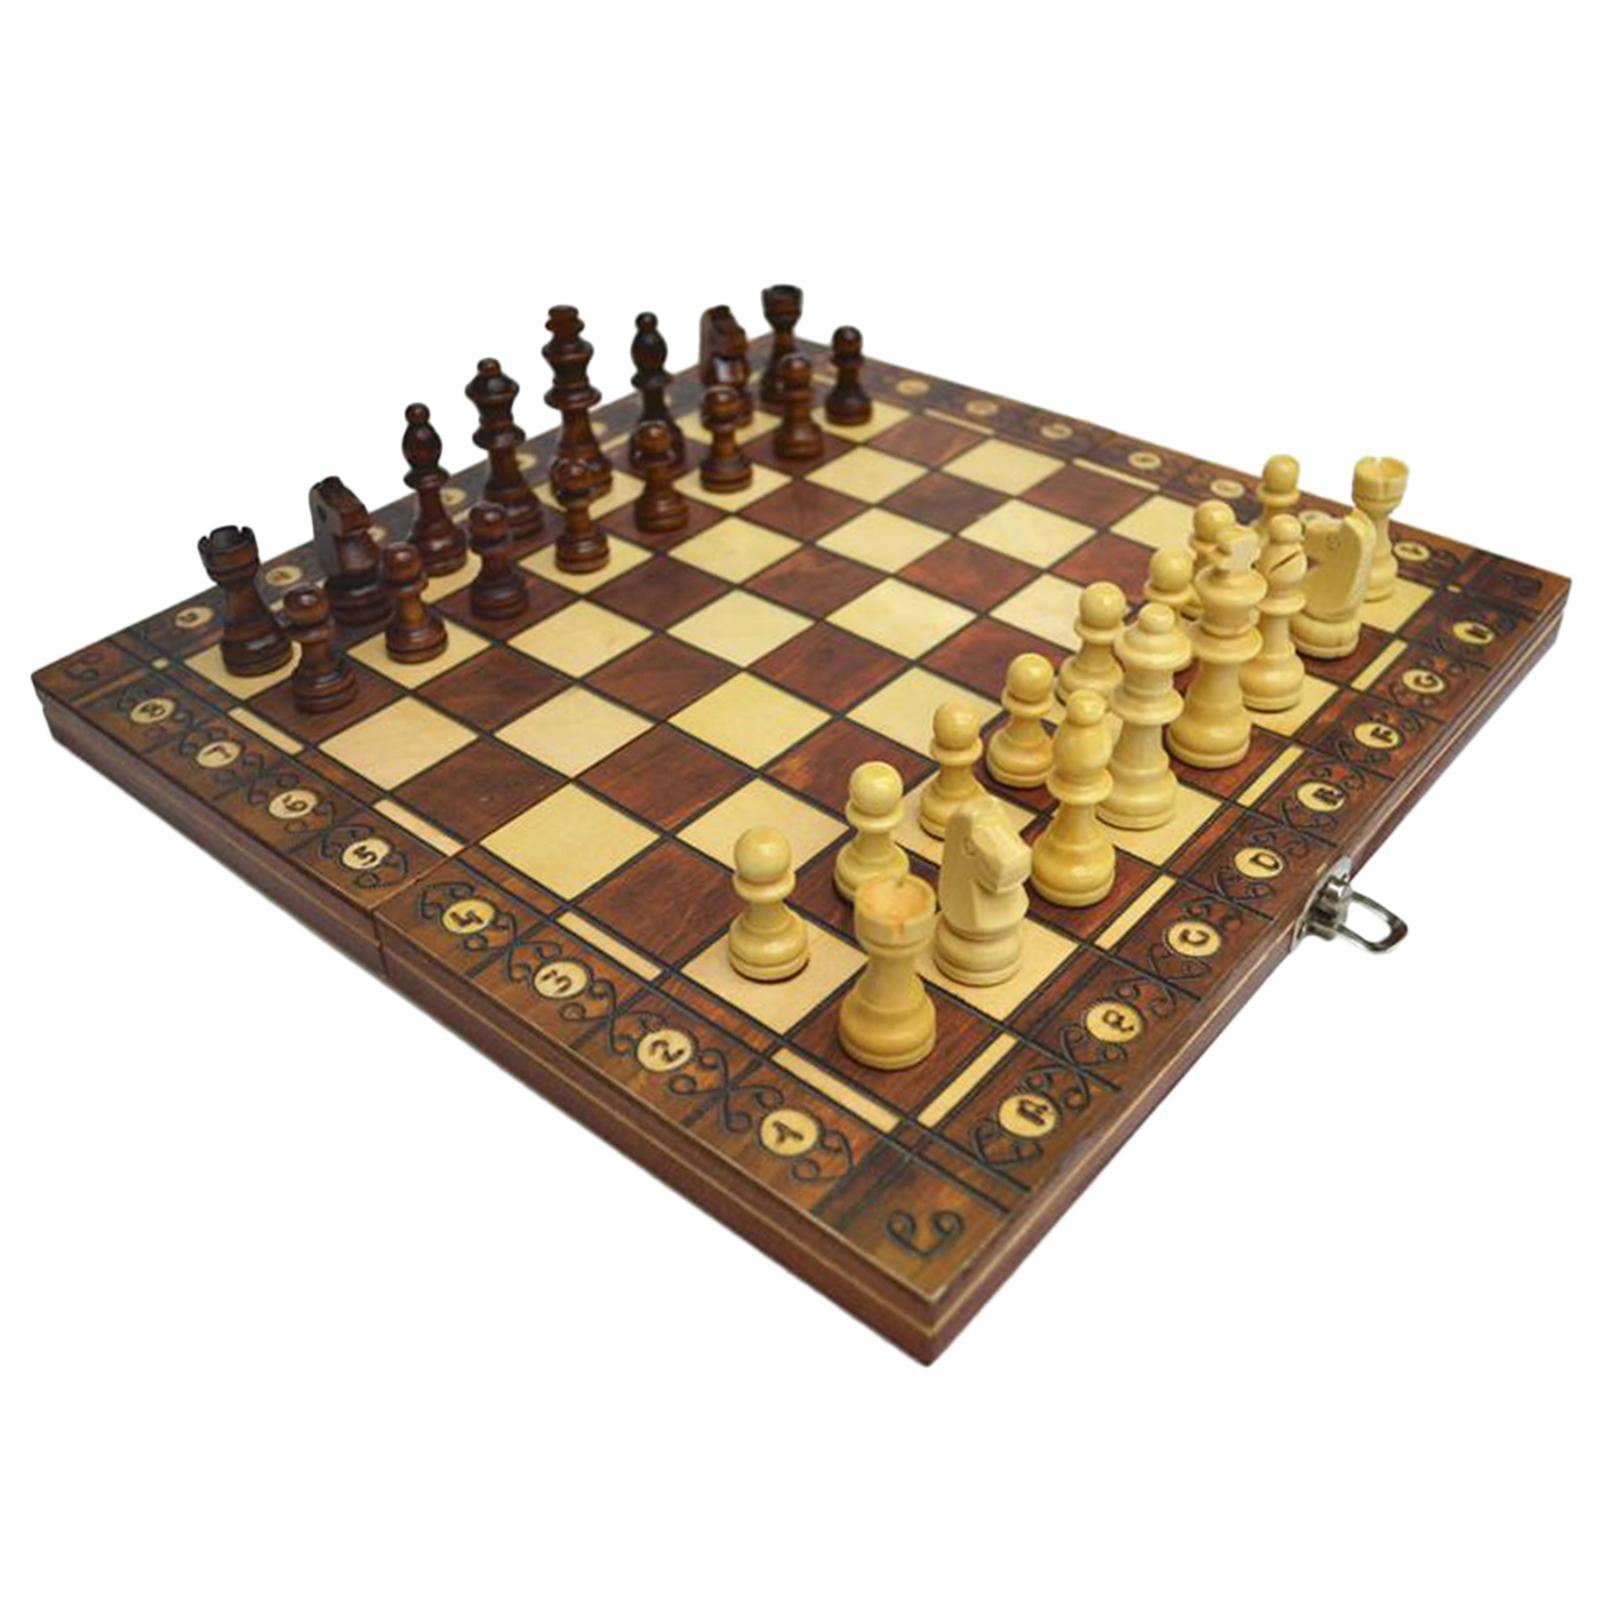 Details about   3 in 1 Wooden International Chess Set Board Travel Games Chess 